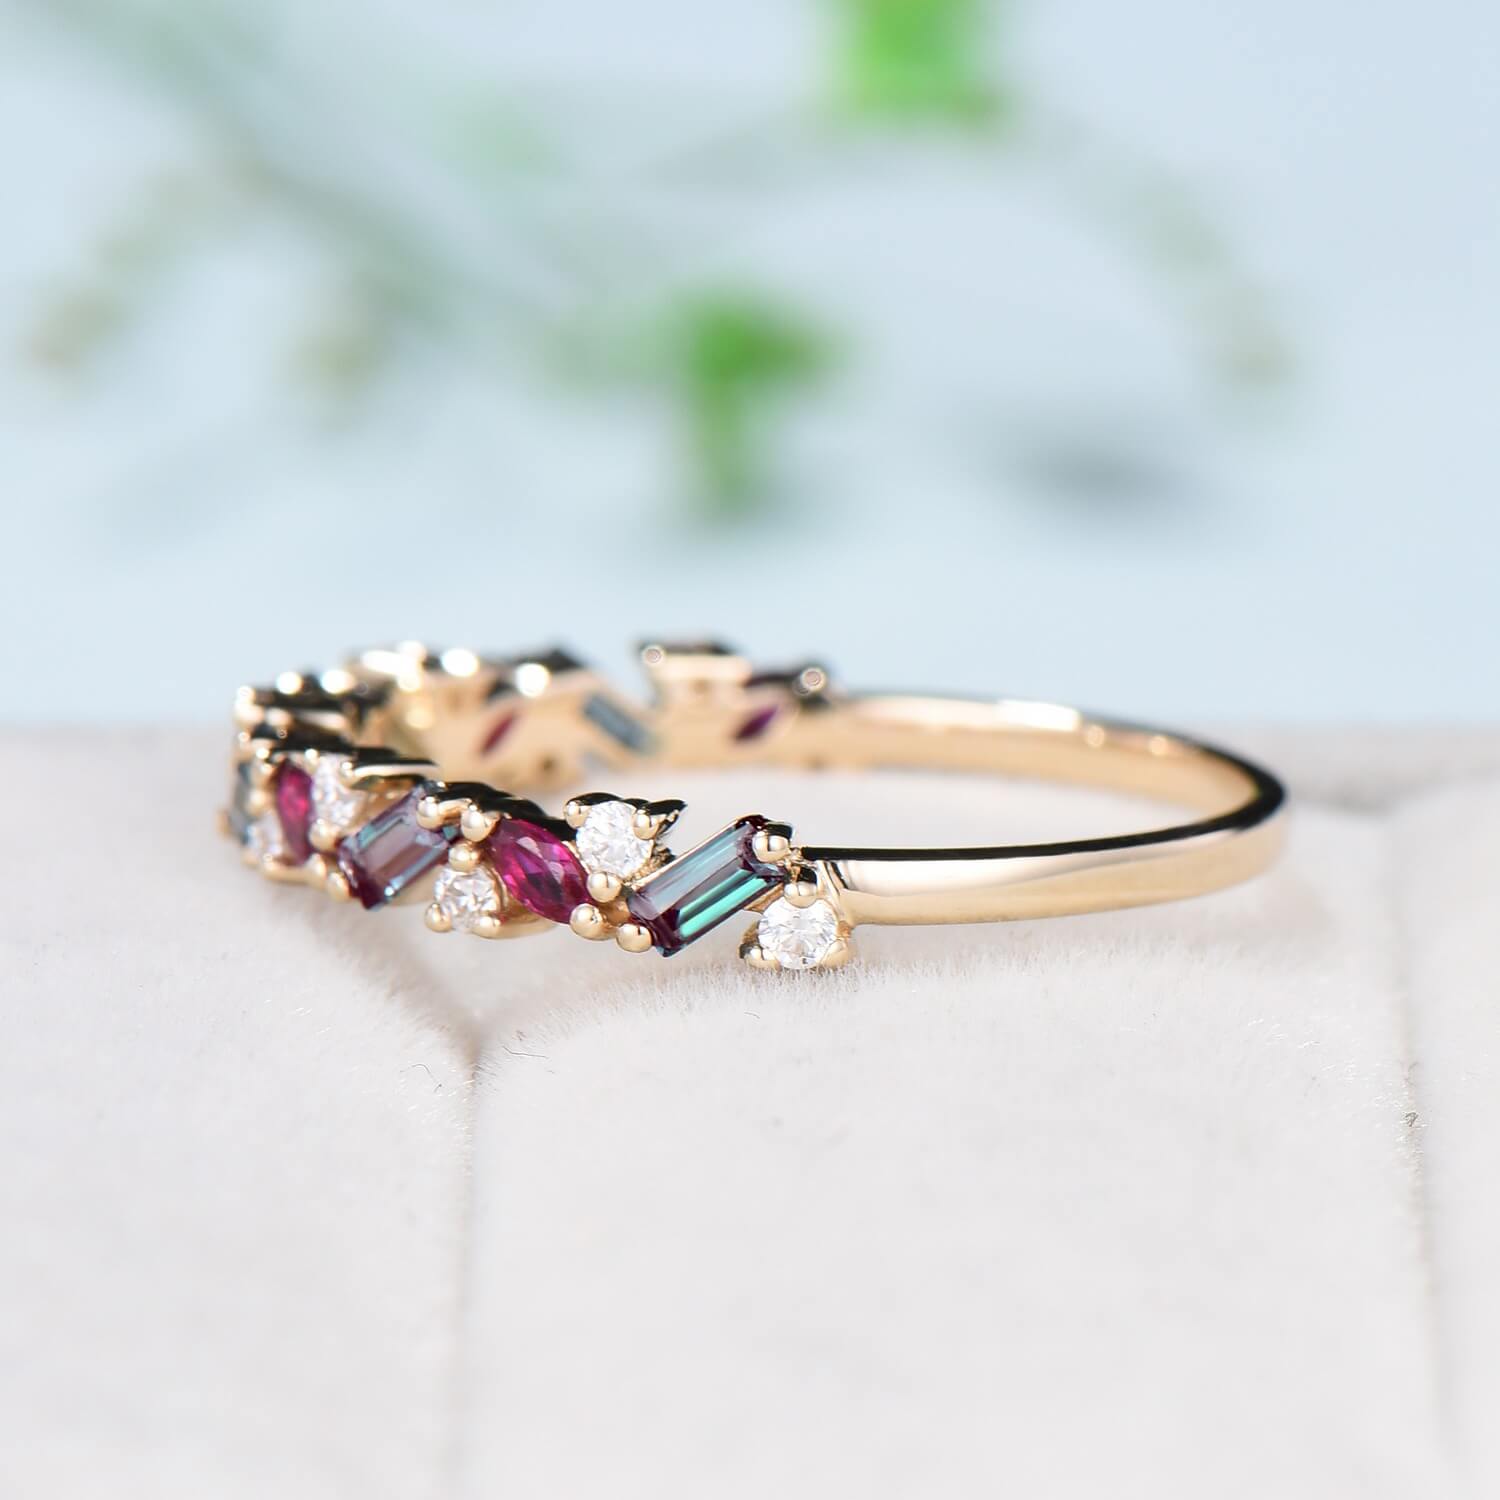 Vintage Alexandrite Ruby Eternity Wedding Band Women Unique Baguette Alexandrite Stackable Ring Marquise Ruby Matching Band Anniversary Gift - PENFINE